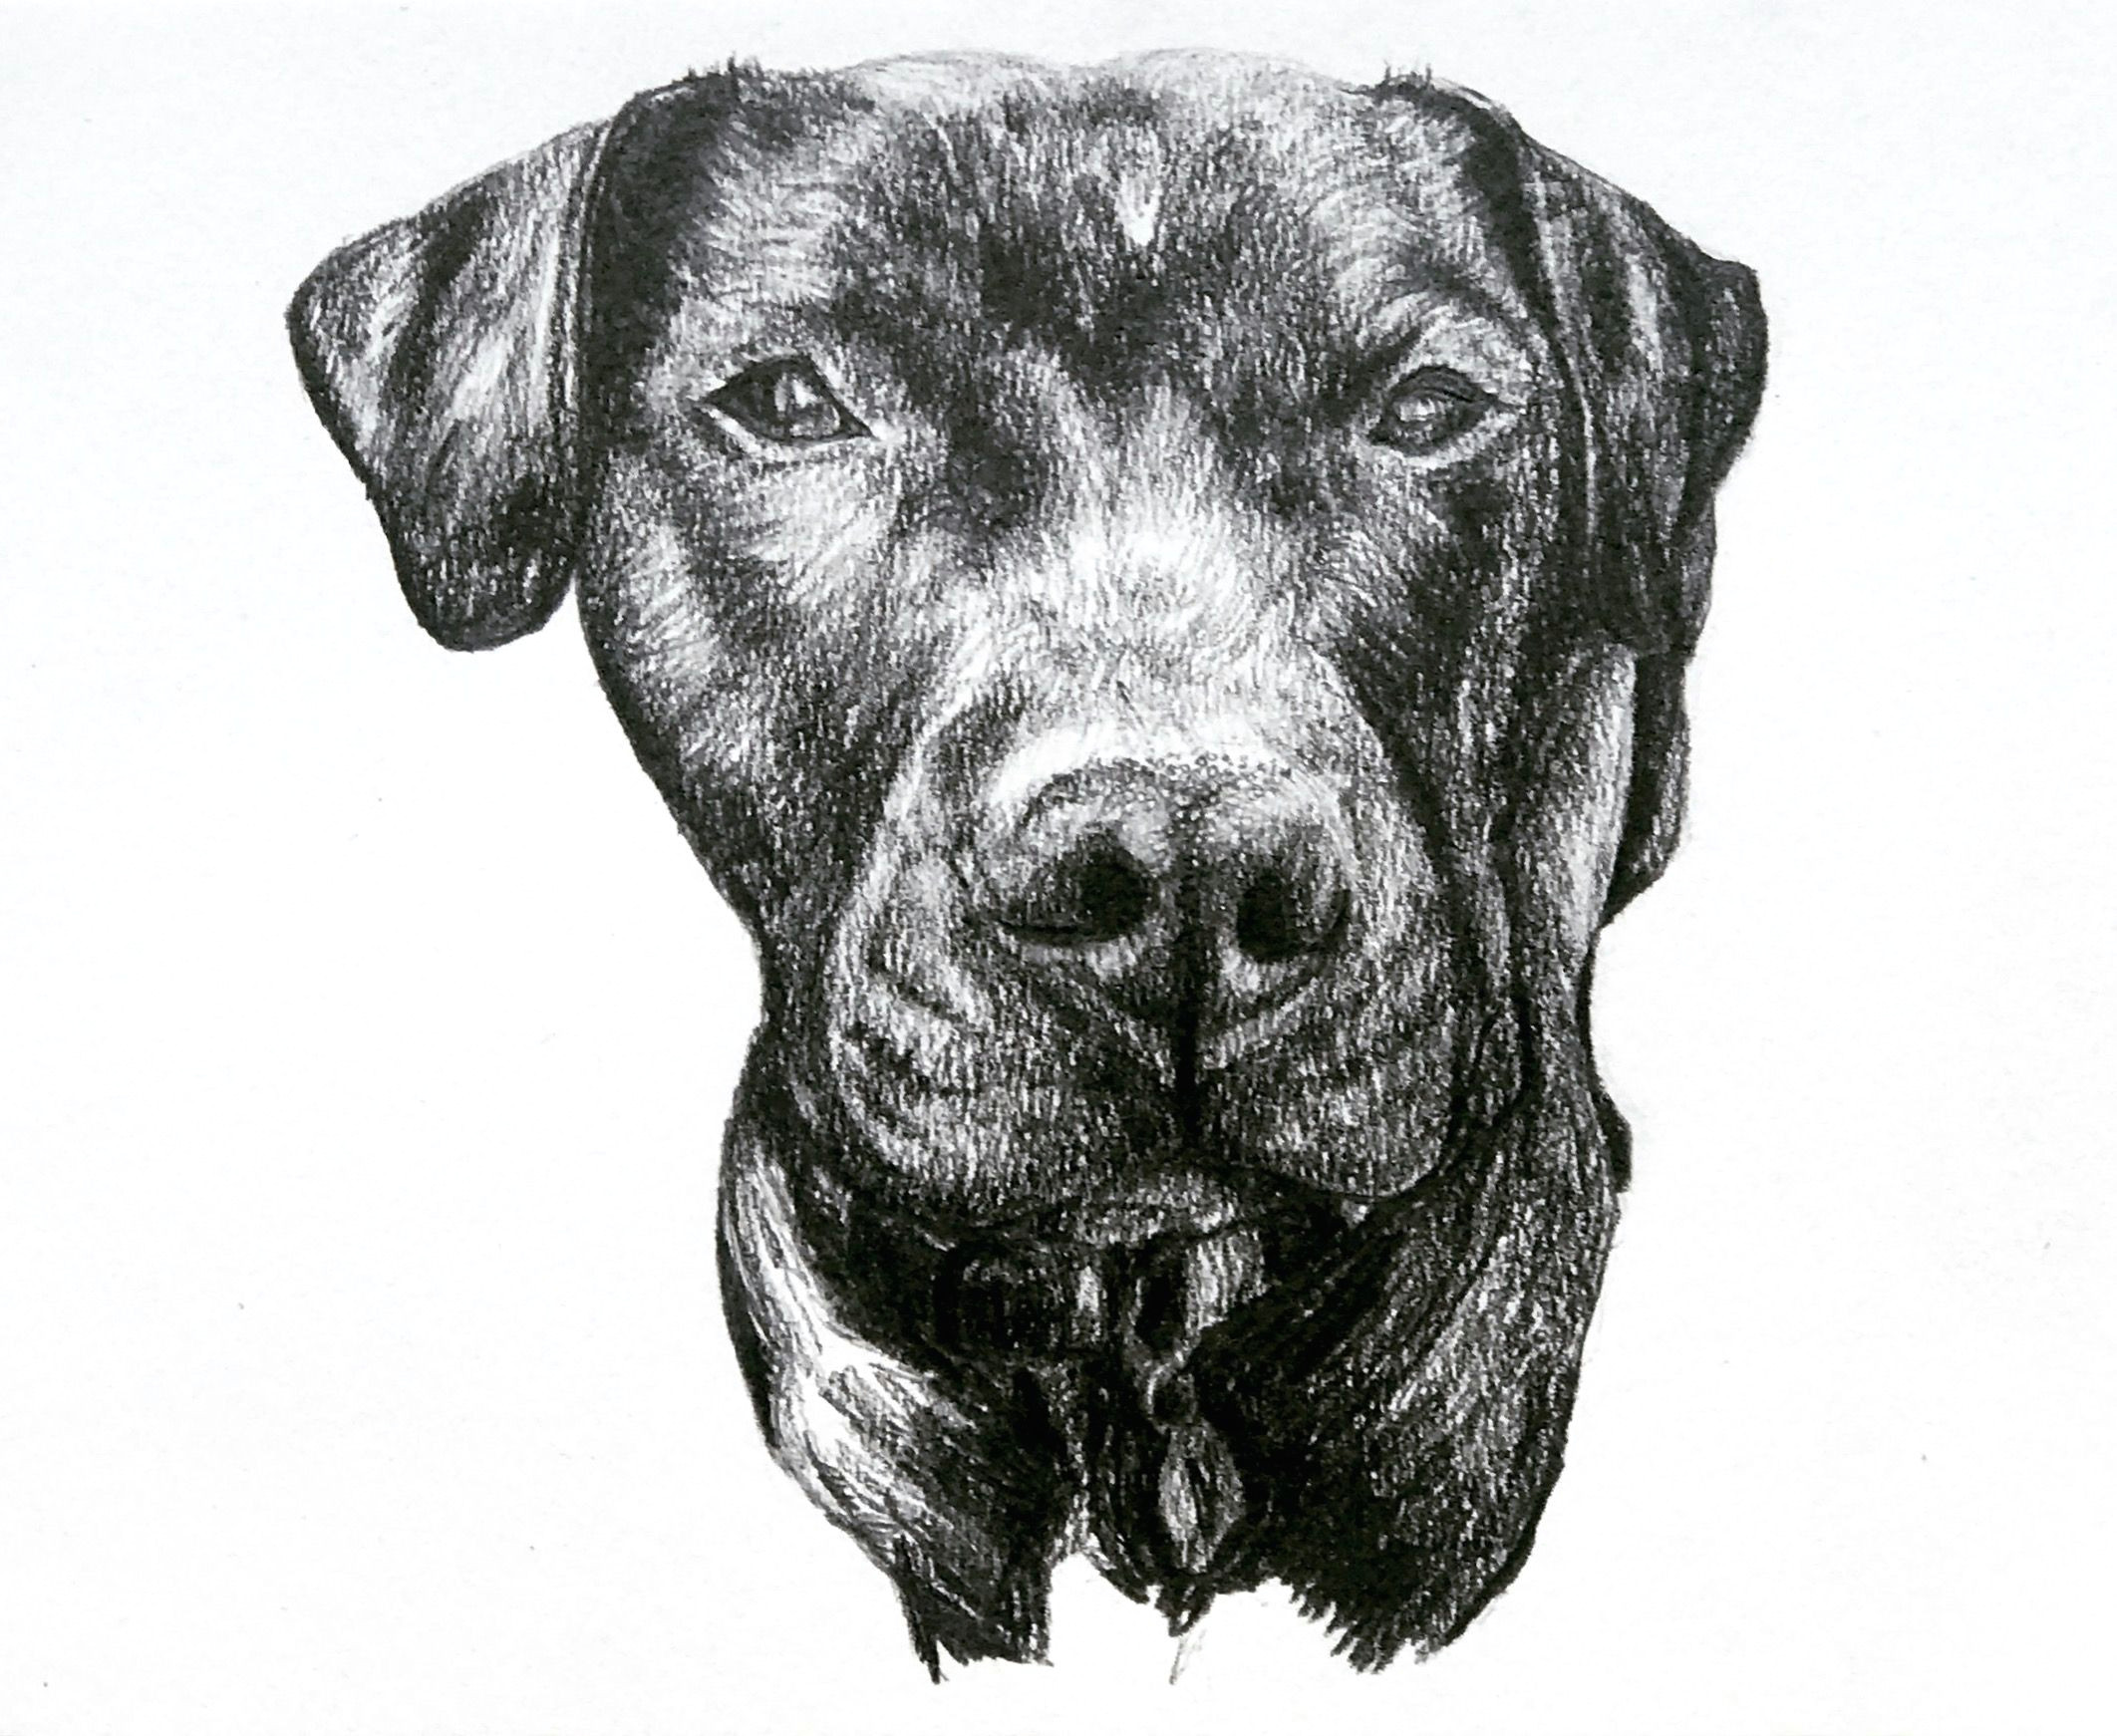 Tonal Drawing Of A Dog 6 tonal Drawing Cup for Free Download On Ayoqq org